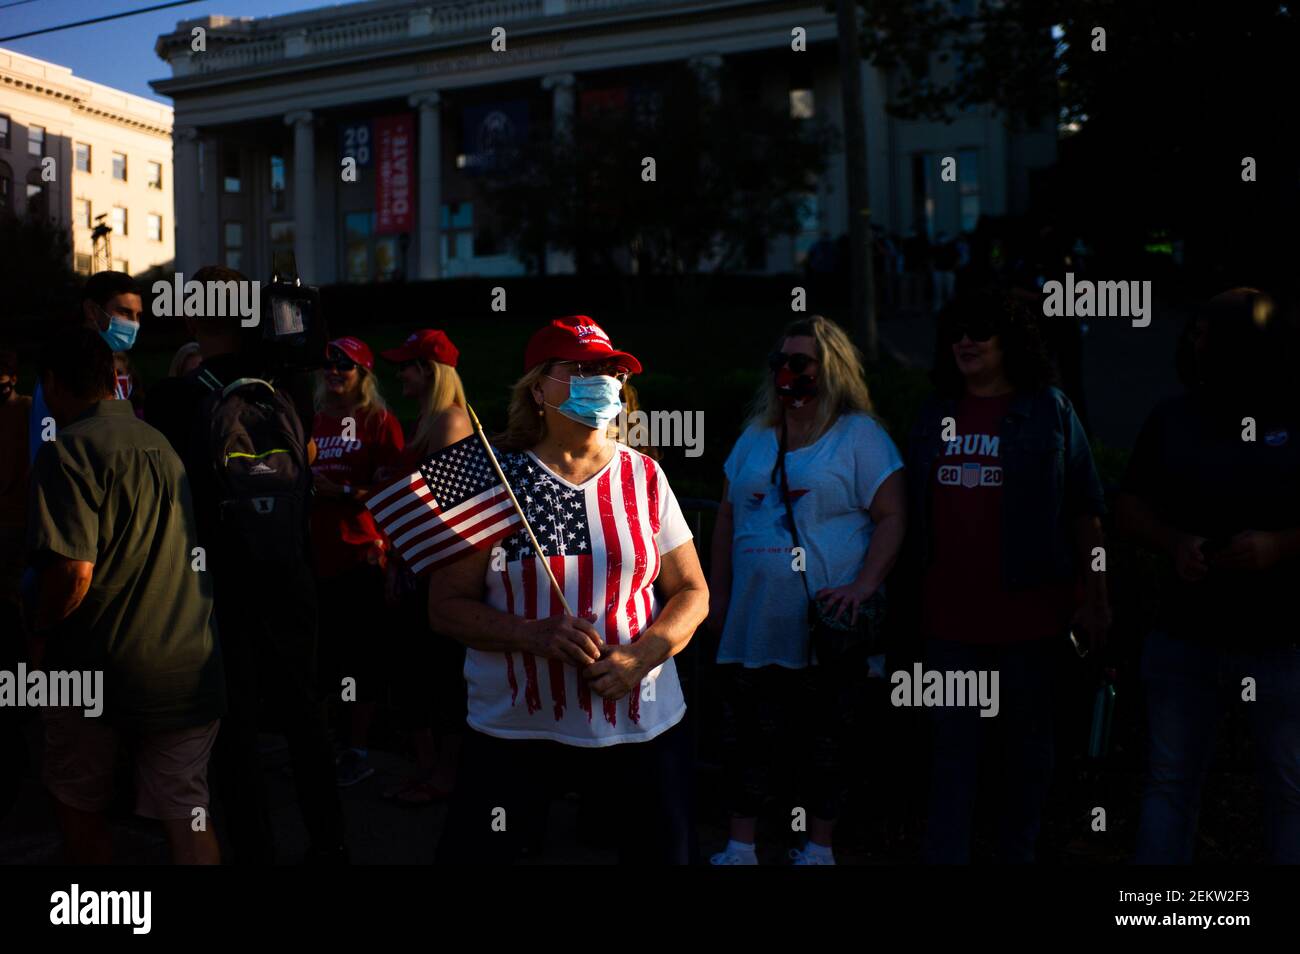 A supporter of President Donald Trump demonstrates before the final Presidential Debate at Belmont University in Nashville, Tennessee, on October 22, 2020. The debate is the final before the election contest between U.S. President Donald Trump and former Vice President Joe Biden. (Photo by Max Oden/Sipa USA) Stock Photo